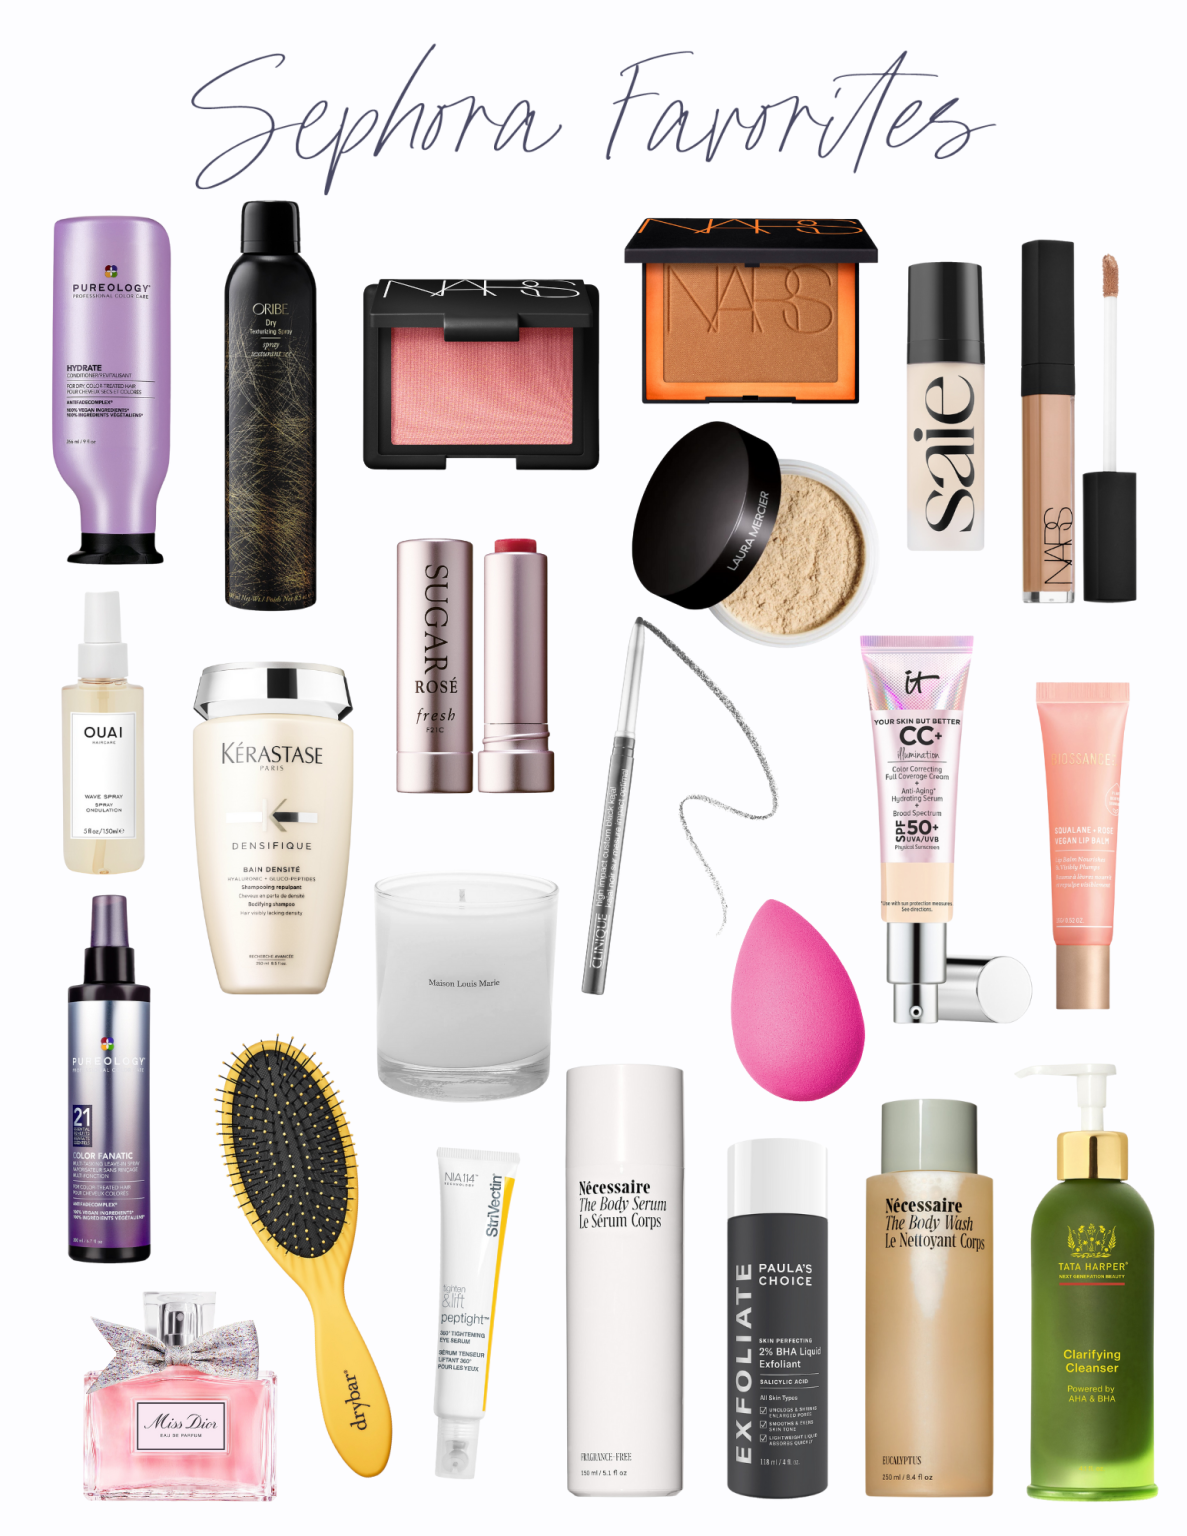 Sephora: Here are the best items I can’t stop recommending